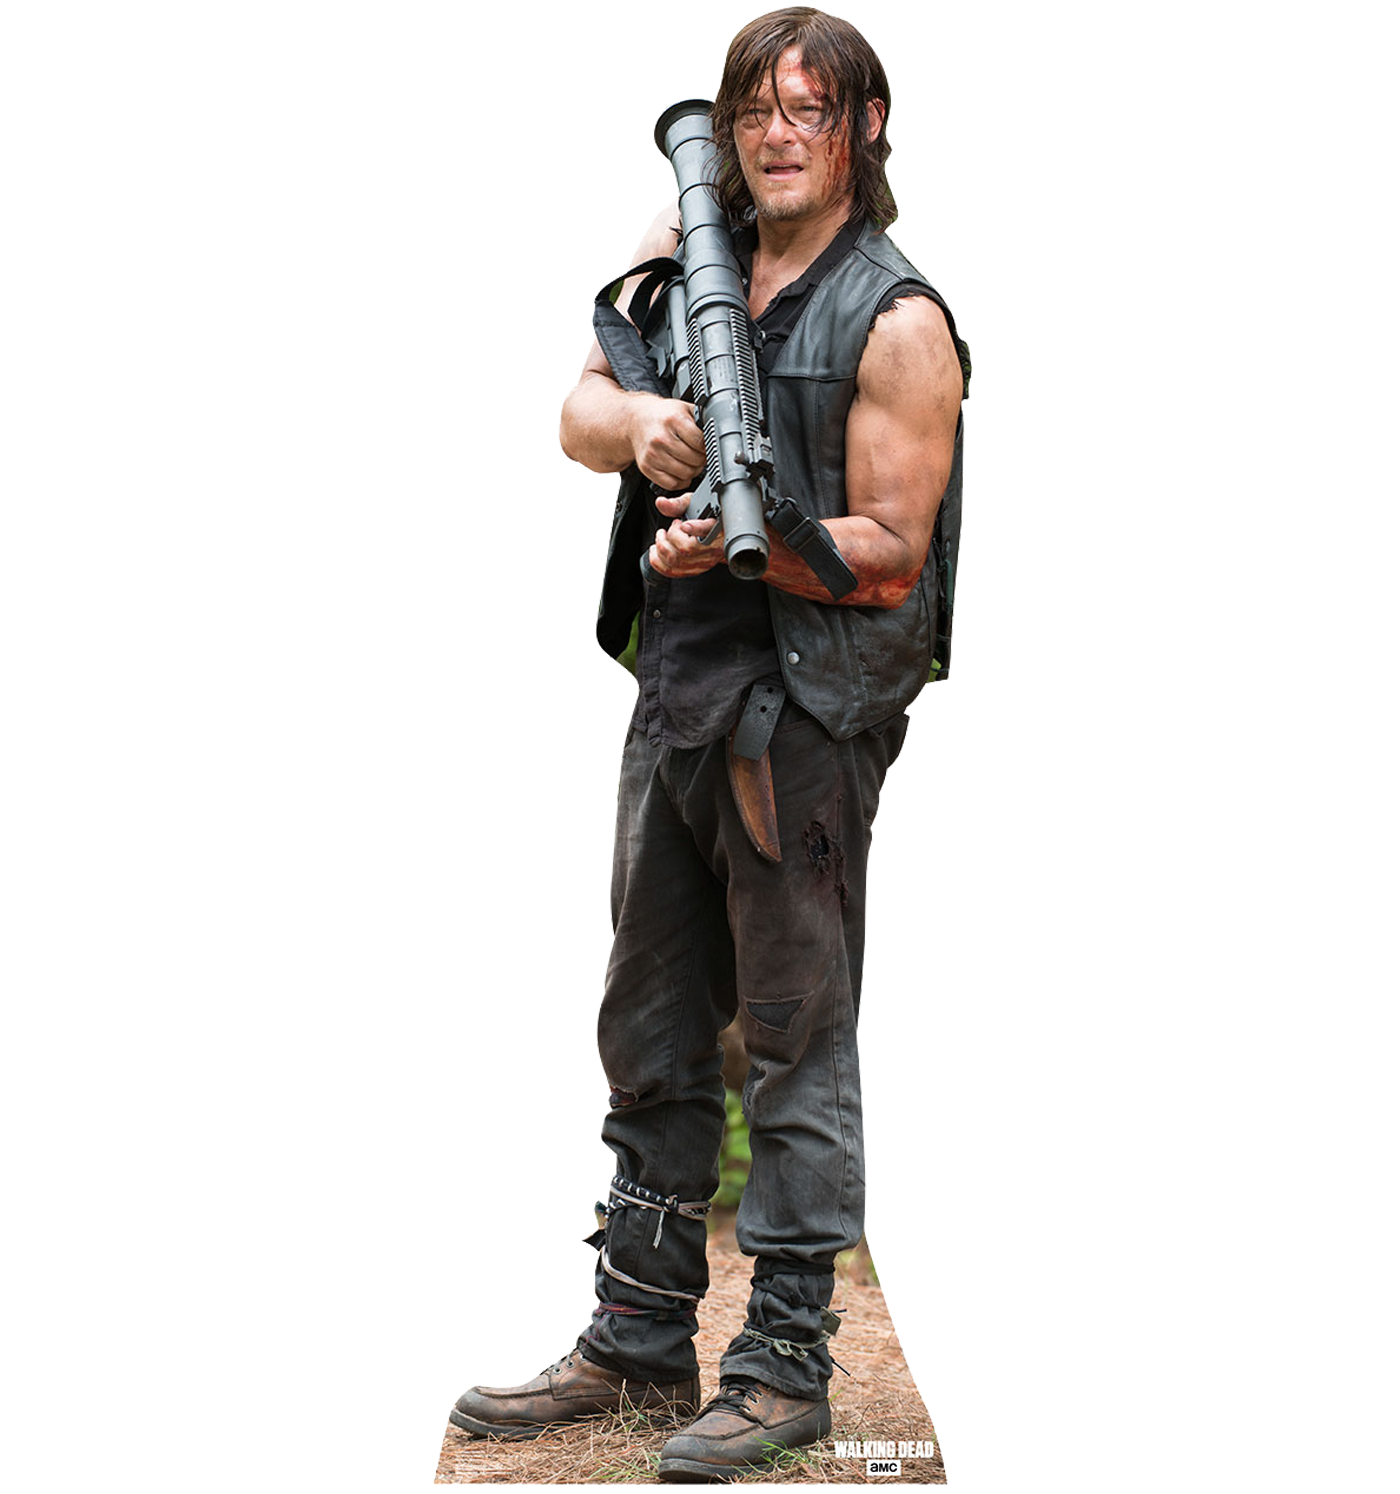 The Walking Dead Daryl with Rocket Launcher Cardboard Cut Out Standee-0